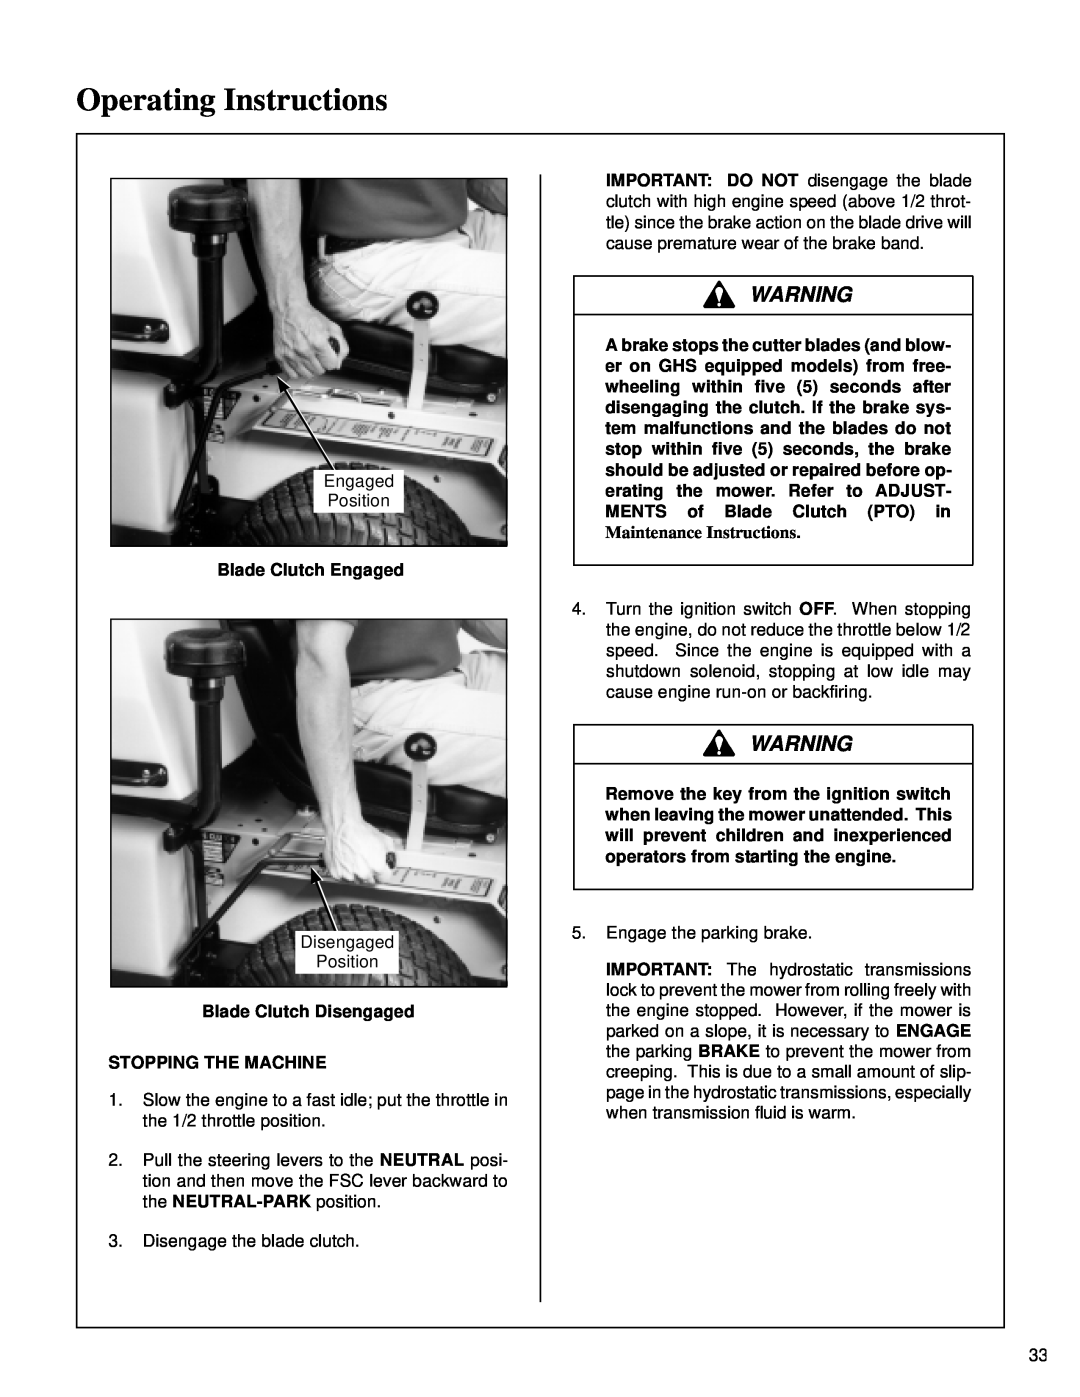 Walker MT owner manual Operating Instructions, Blade Clutch Engaged, Blade Clutch Disengaged STOPPING THE MACHINE 